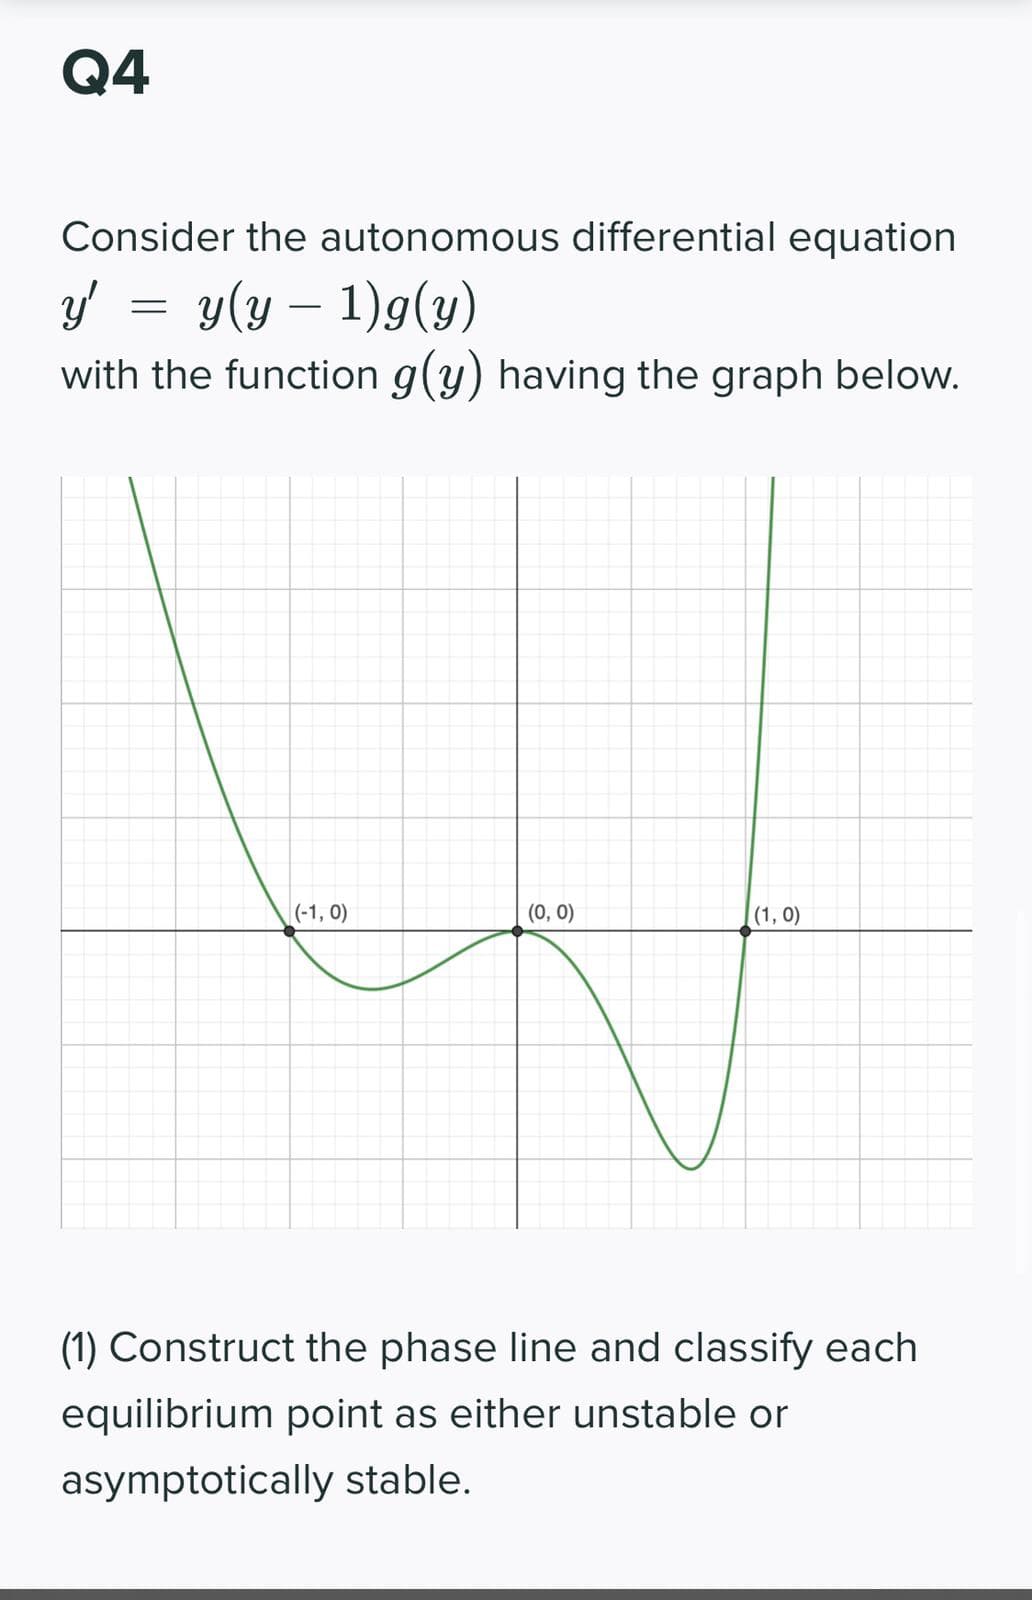 Q4
Consider the autonomous differential equation
y(y – 1)g(y)
with the function g(y) having the graph below.
-
|(-1, 0)
(0, 0)
(1, 0)
(1) Construct the phase line and classify each
equilibrium point as either unstable or
asymptotically stable.
